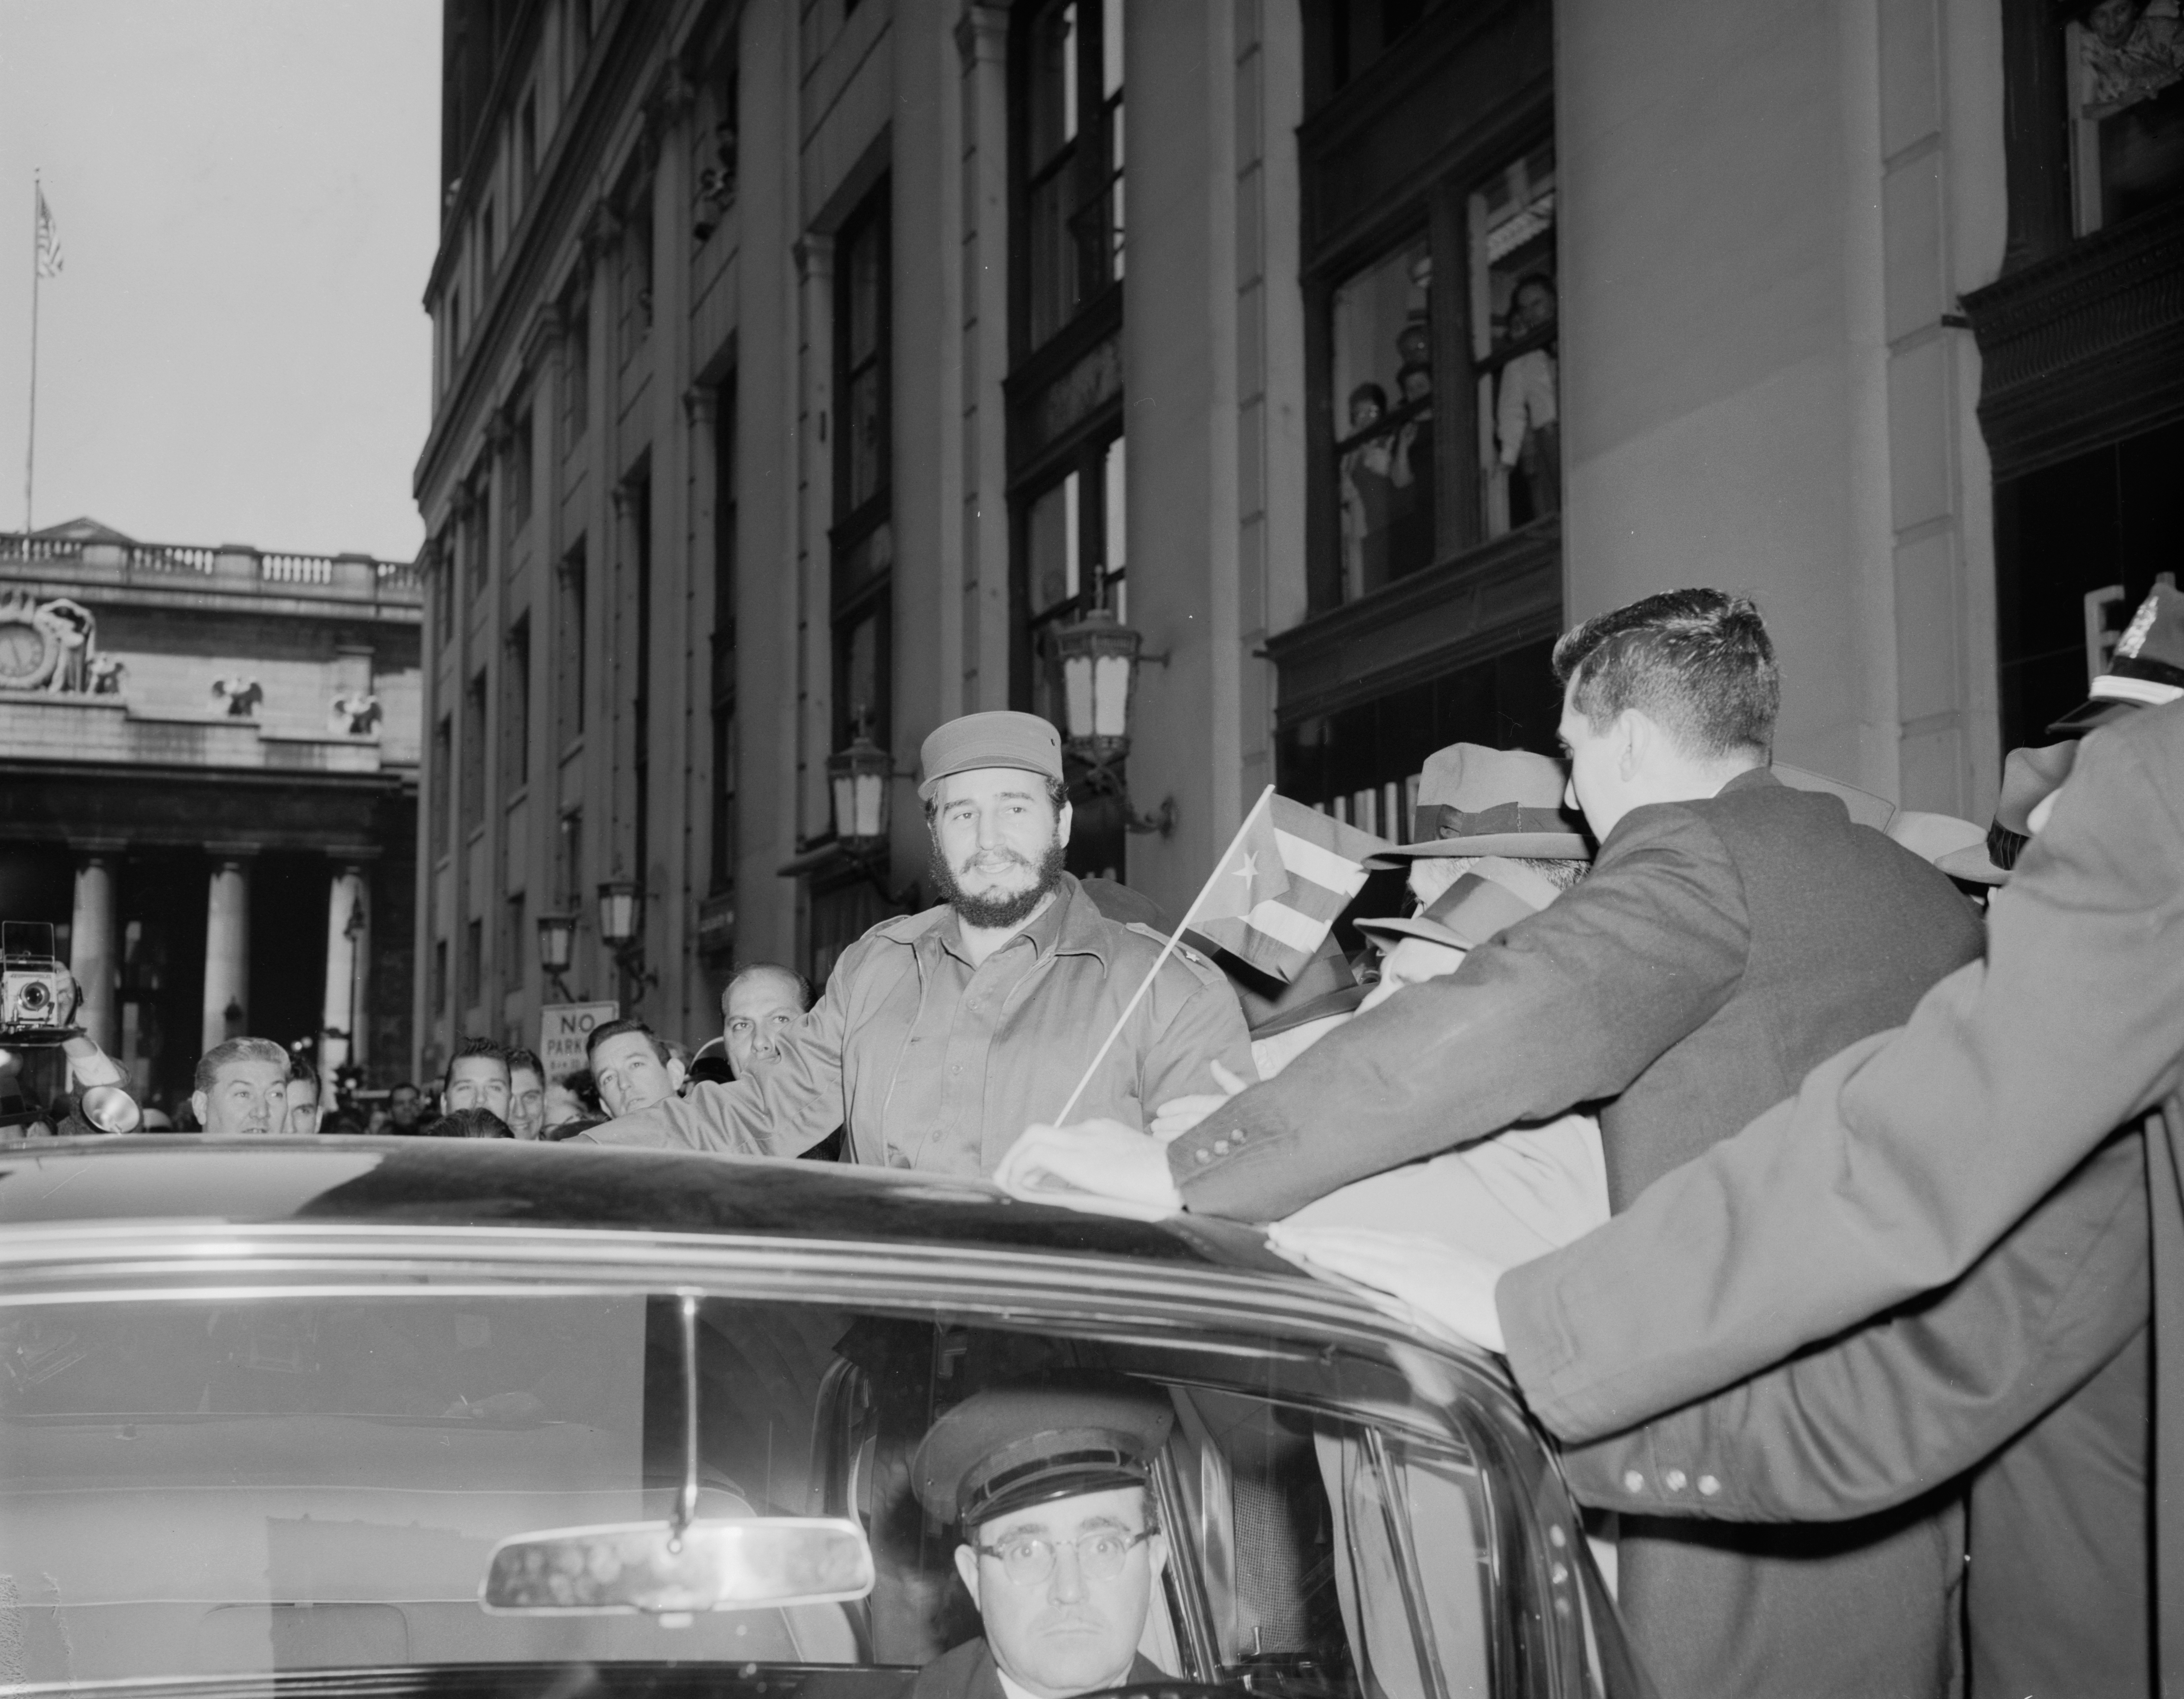 April 21, 1959 - New York City, NY - Fidel Castro, the leader of the Cuban revolutionaries, smiles at the crowds that welcomed him to the city.